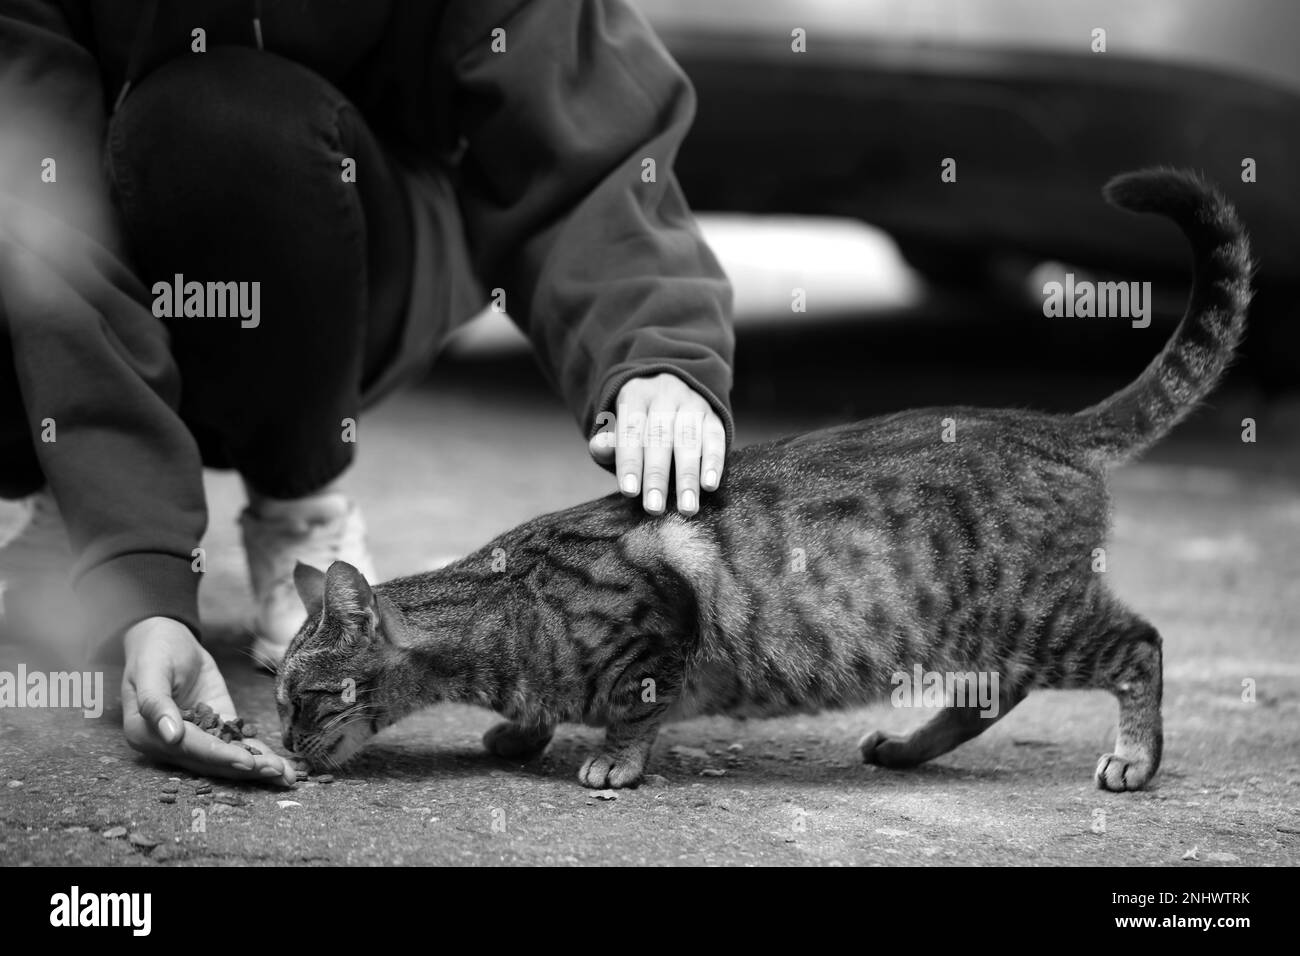 Woman feeding homeless cat outdoors. Black and white effect Stock Photo